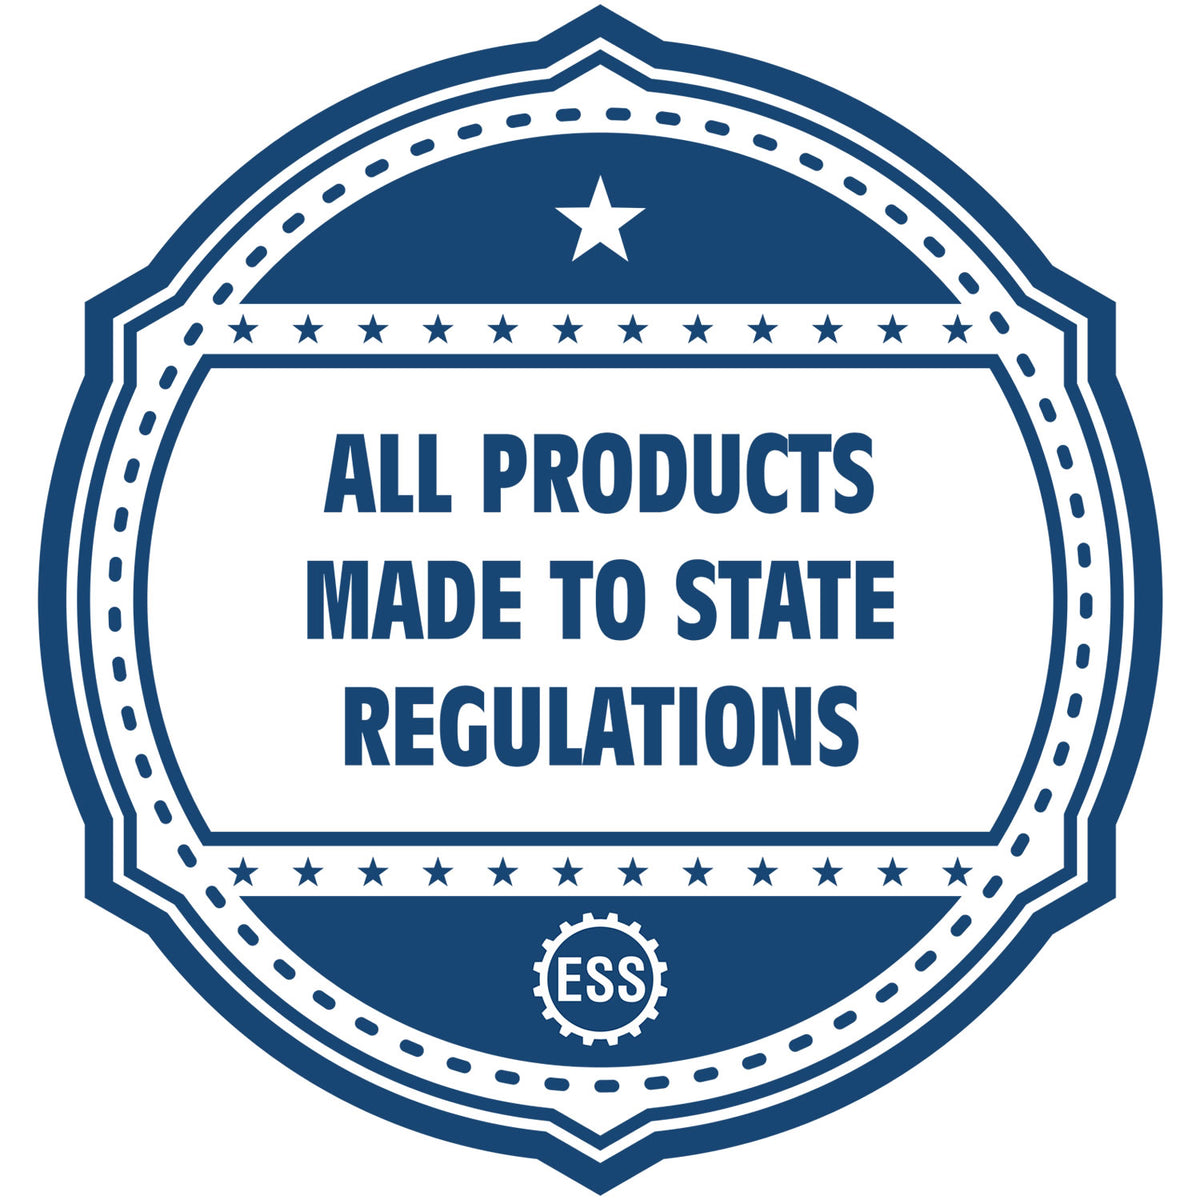 A blue icon or badge for the State of Mississippi Extended Long Reach Geologist Seal showing that this product is made in compliance with state regulations.